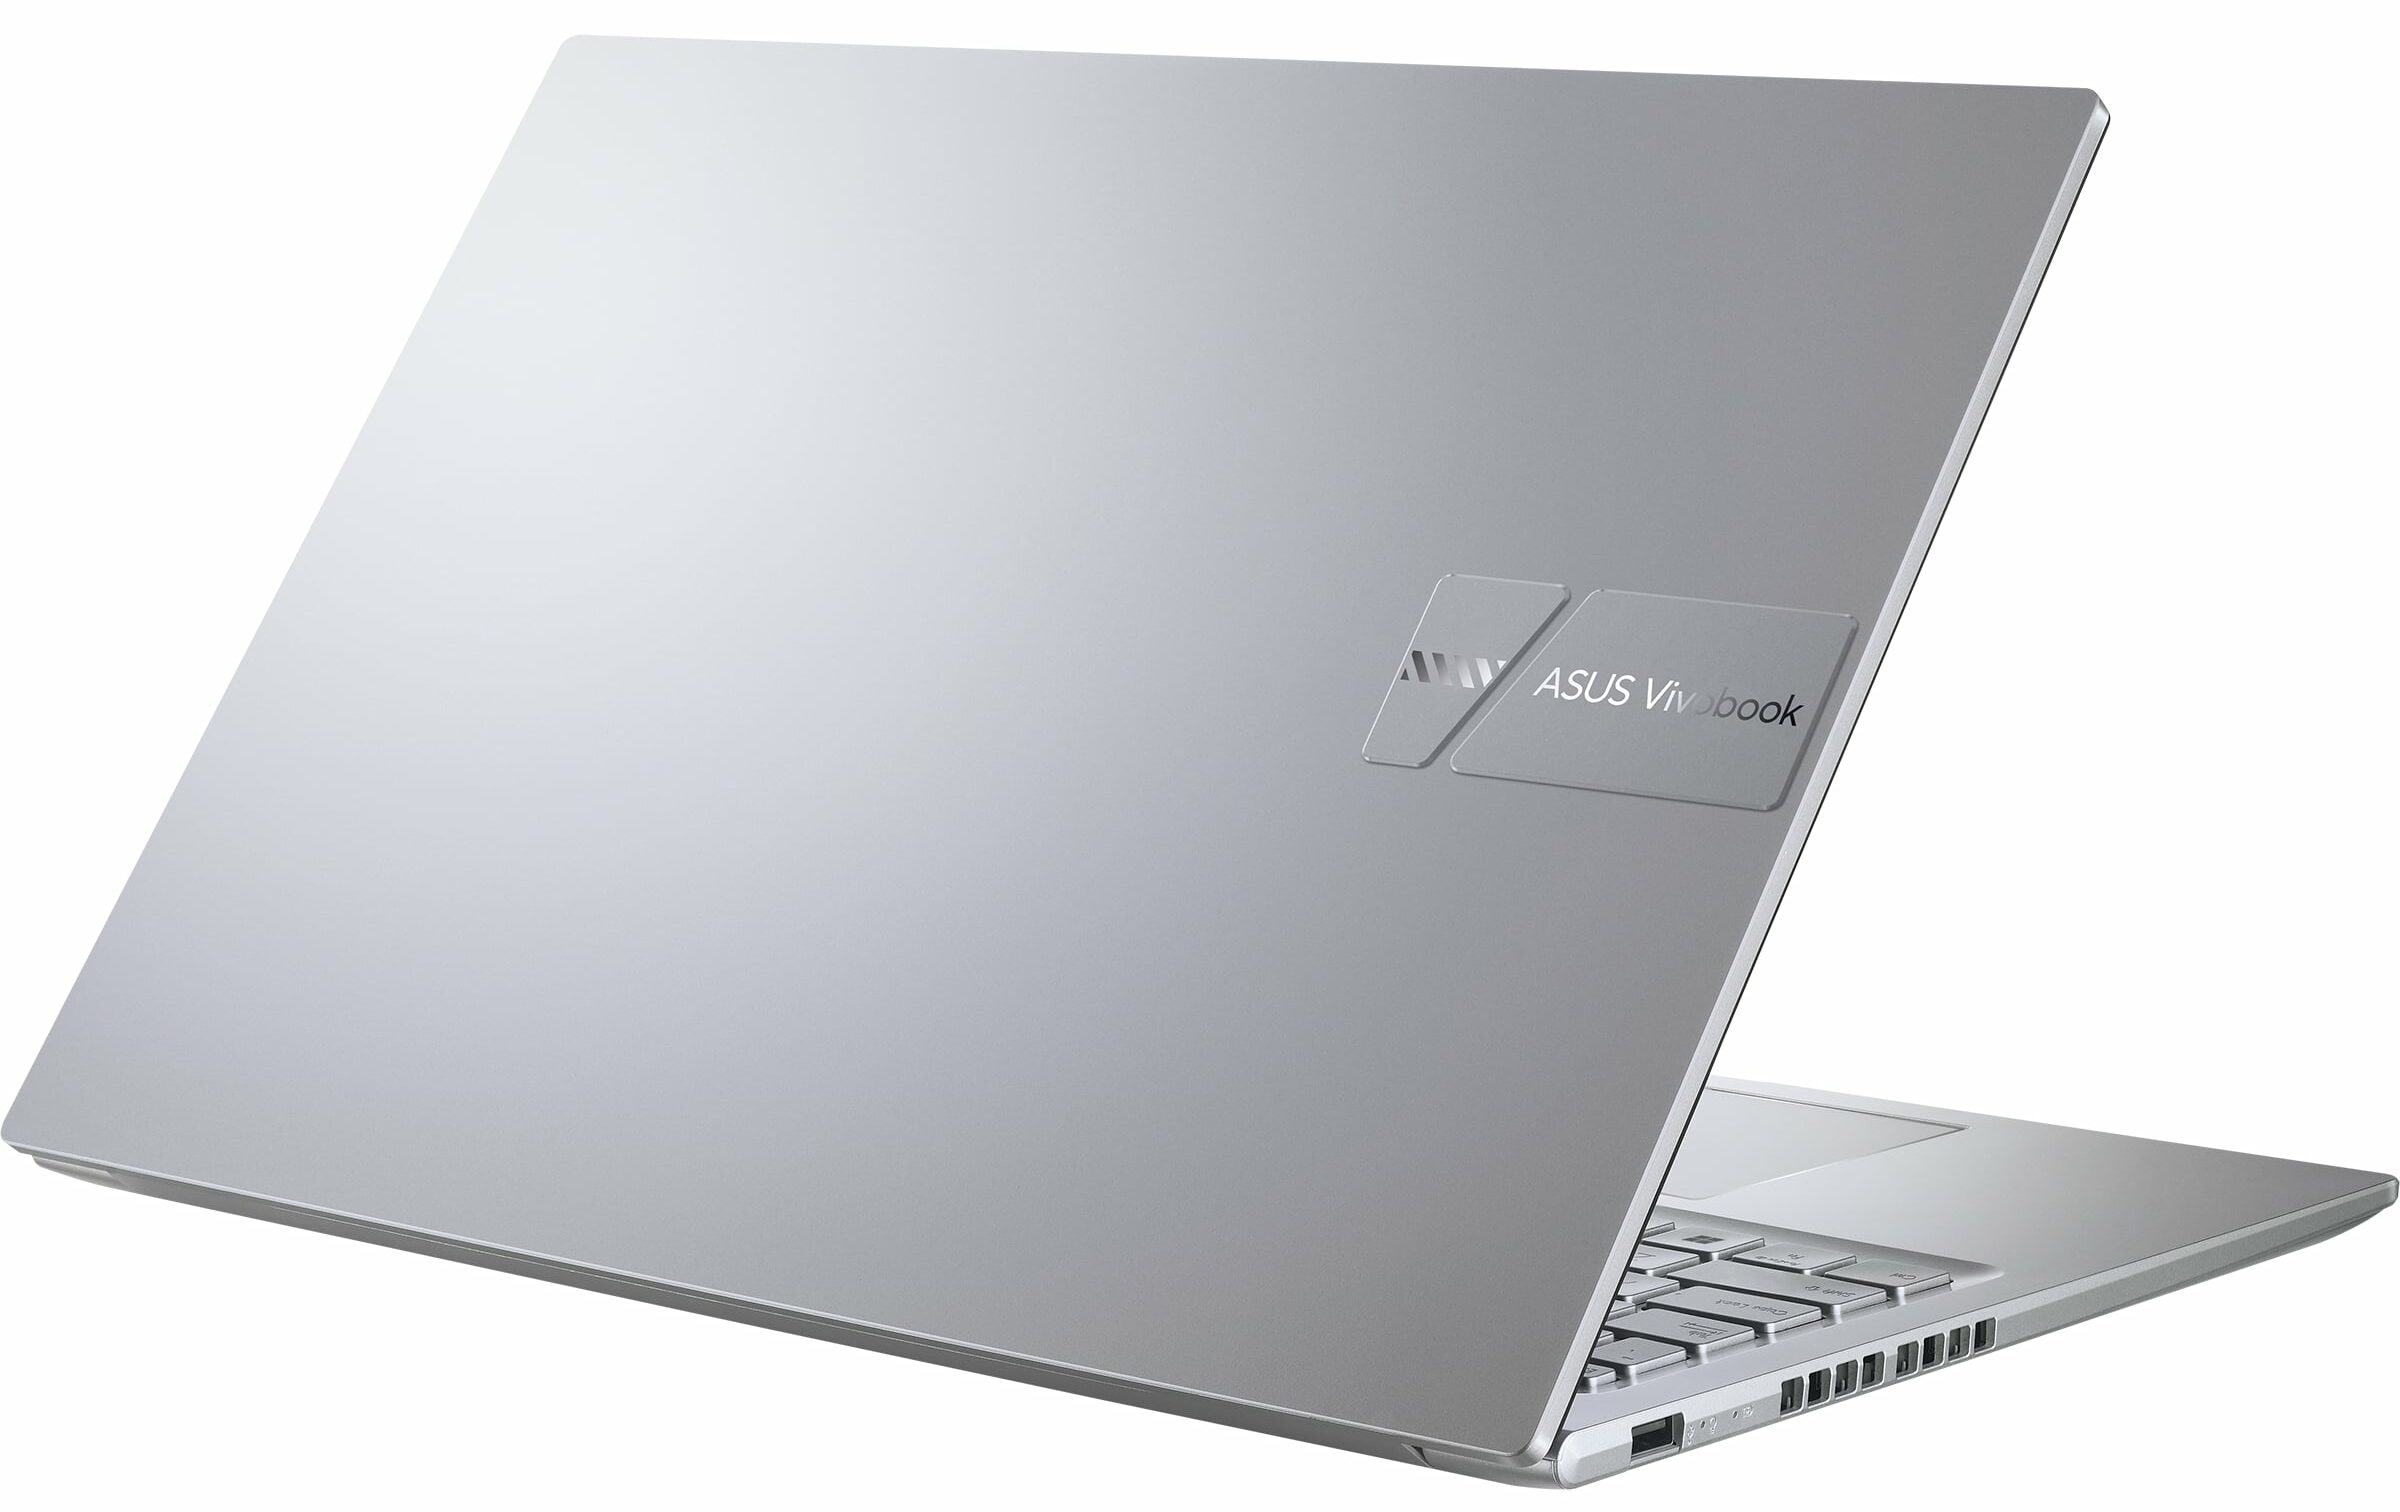 ASUS Vivobook 16 (X1605) review - affordability comes at 16 inches: Verdict